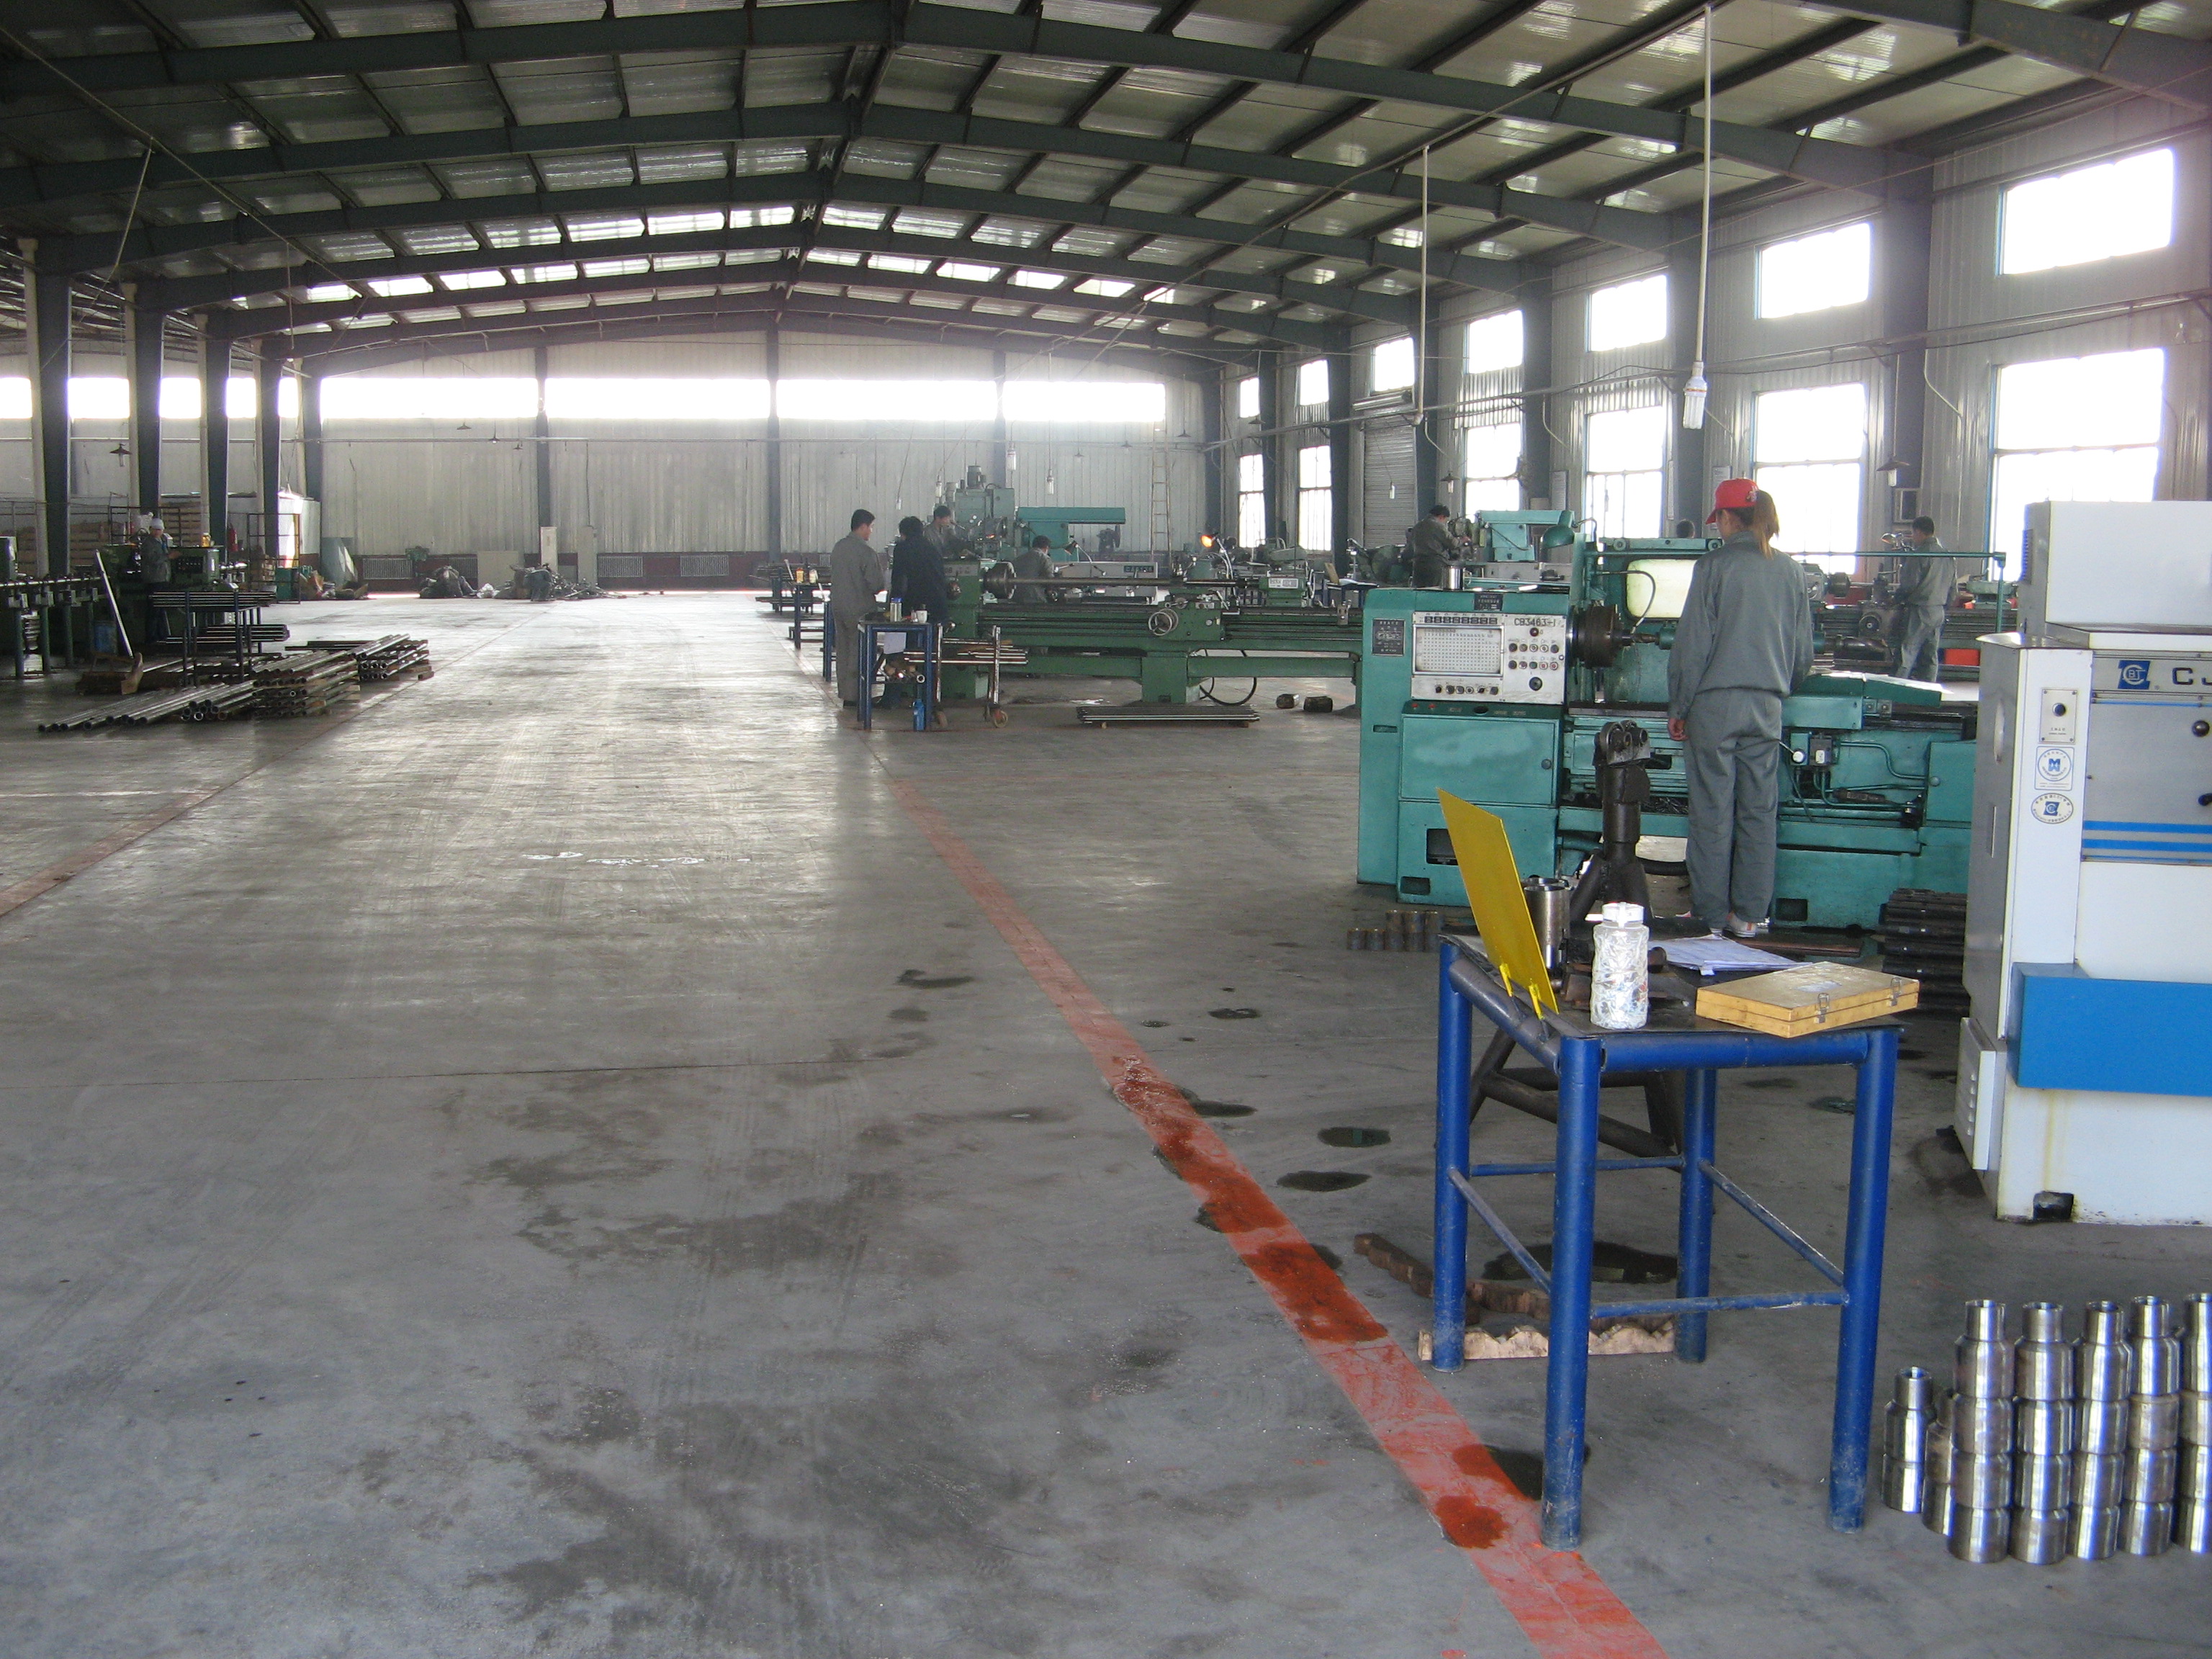 Shouguang Yun Zhuo Machinery Co., LTD successfully completed the overall relocation upgrade